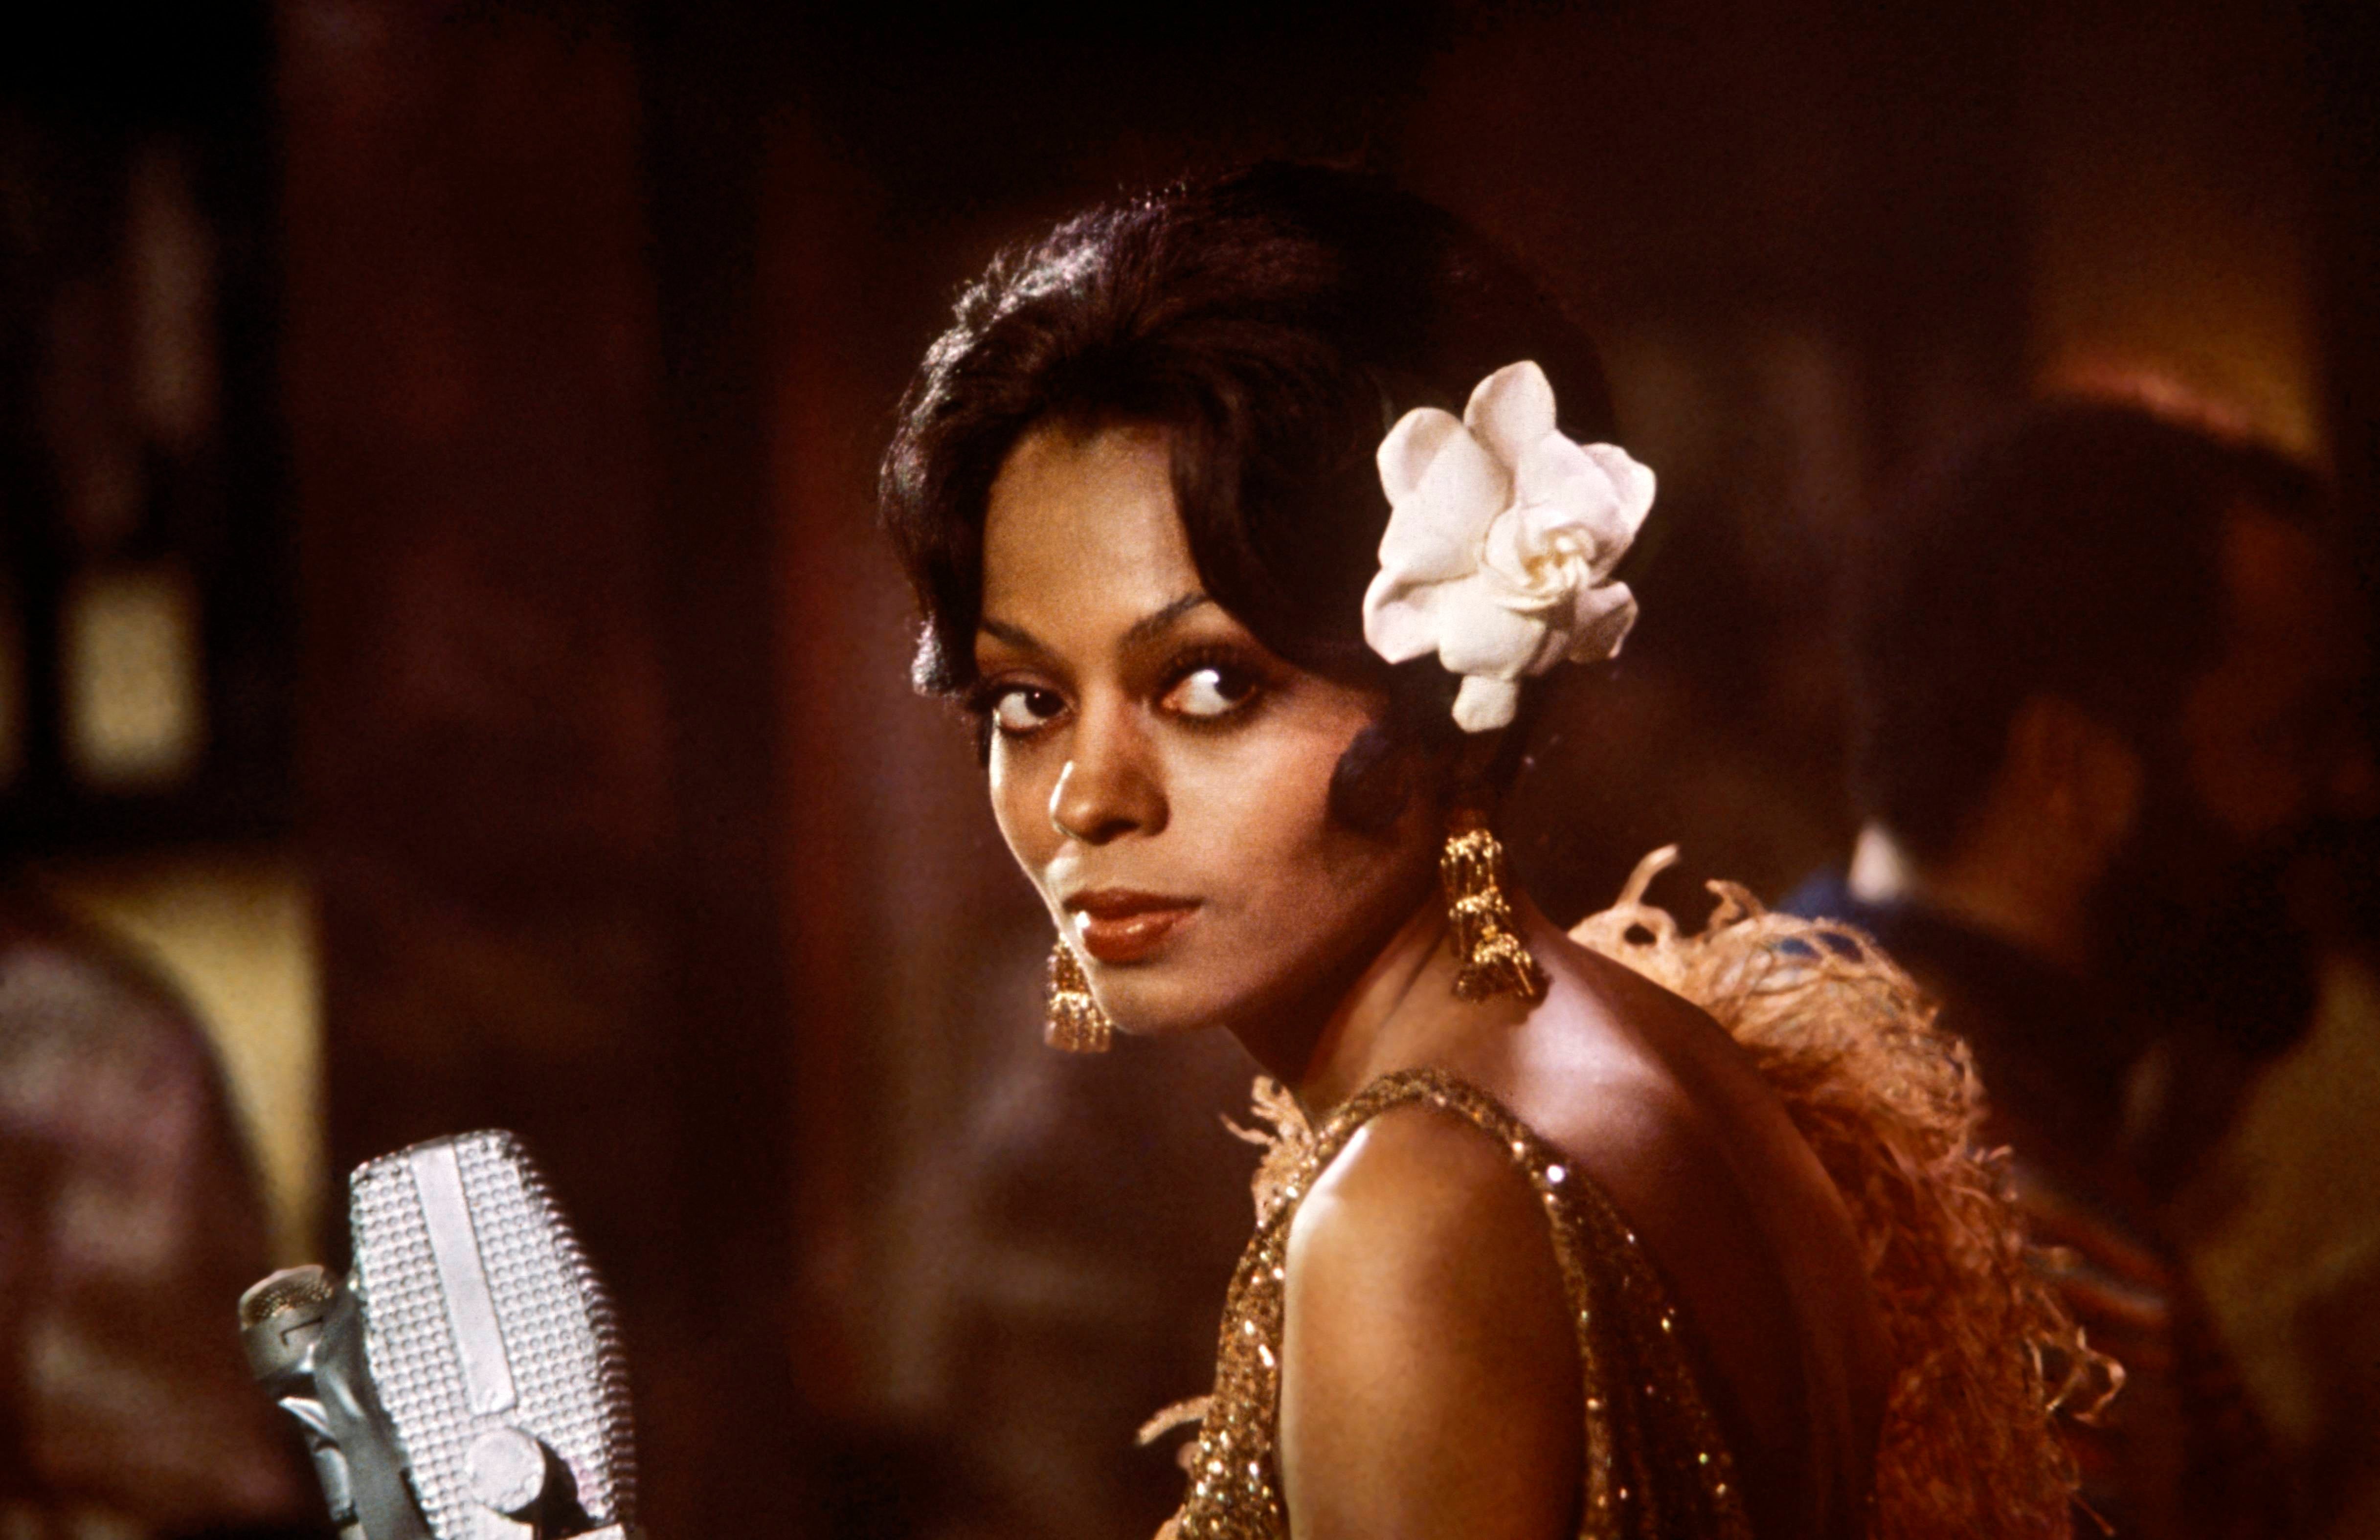 22 Of The Most Iconic Roles Played By Black Women in Hollywood
